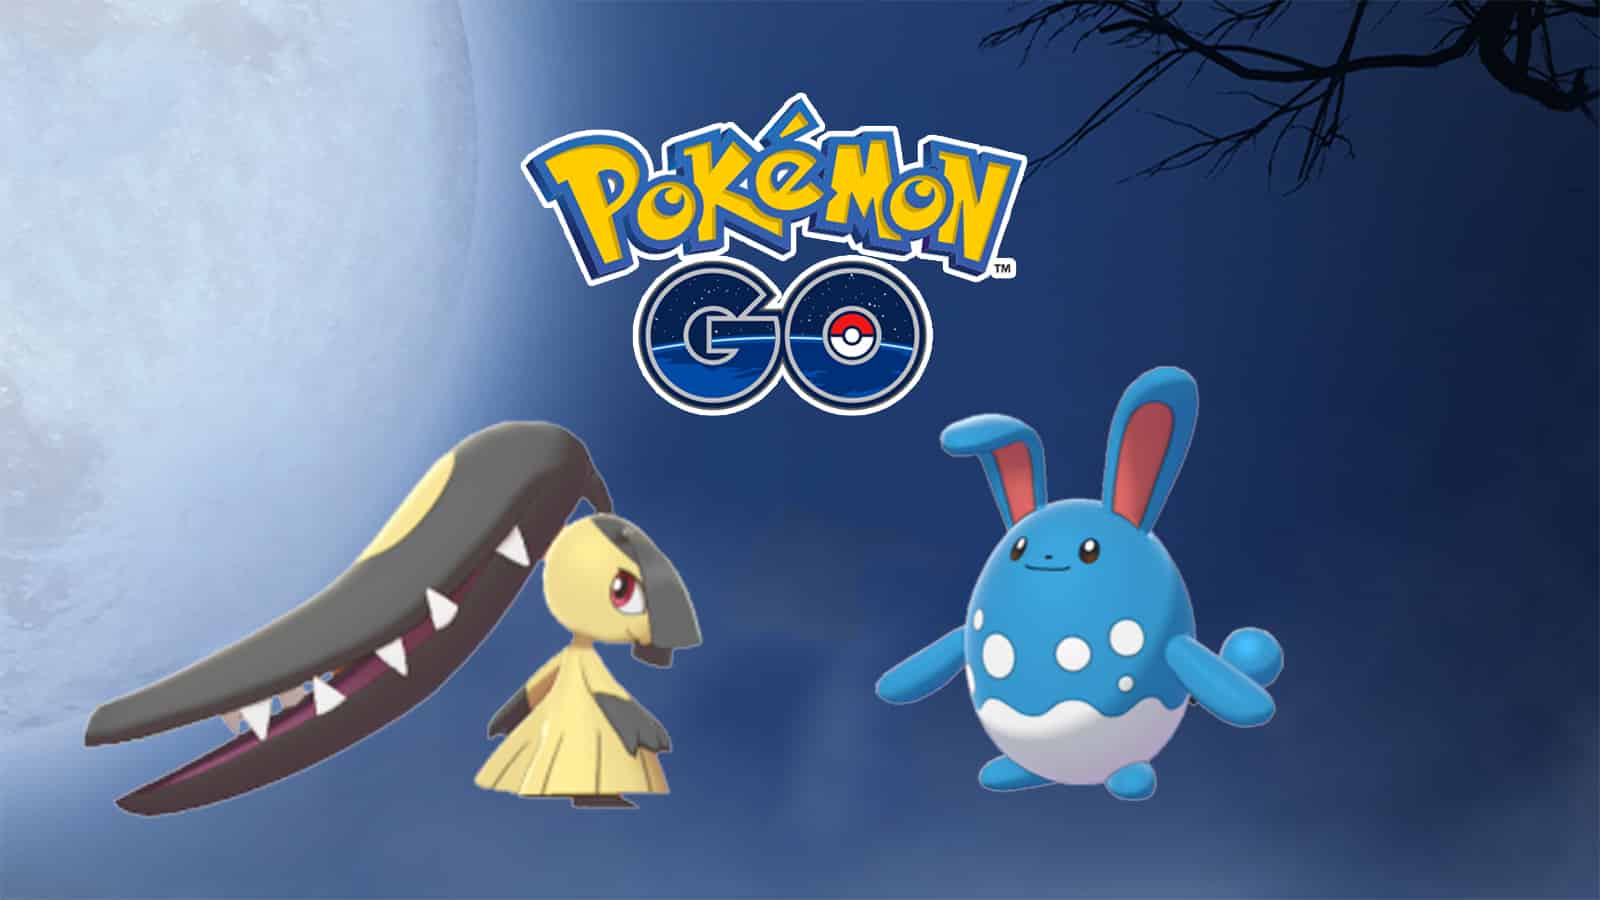 Mawile in Pokémon GO: best counters, attacks and Pokémon to defeat